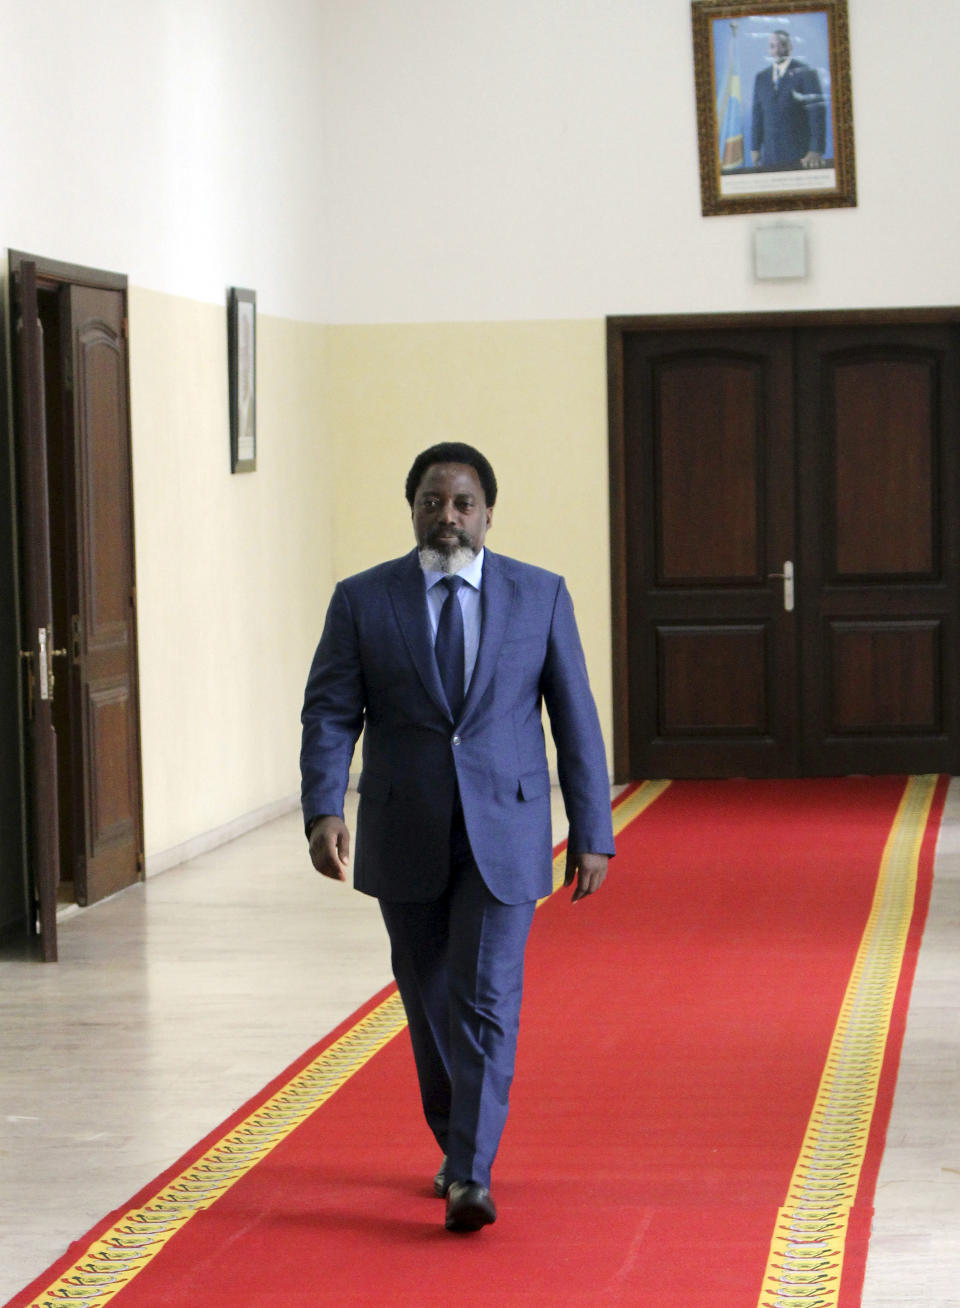 Democratic Republic of Congo's President Joseph Kabila walks to interview by the Associated Press at the Nation's Palace in Kinshasa Sunday Dec. 9, 2018. Kabila is stepping down after this month's election but he doesn't rule out seeking the post again in the future. Kabila said he hopes to continue to be active in tackling the vast challenges that remain in this mineral-rich but "complicated nation." (AP Photo/John Bompengo)